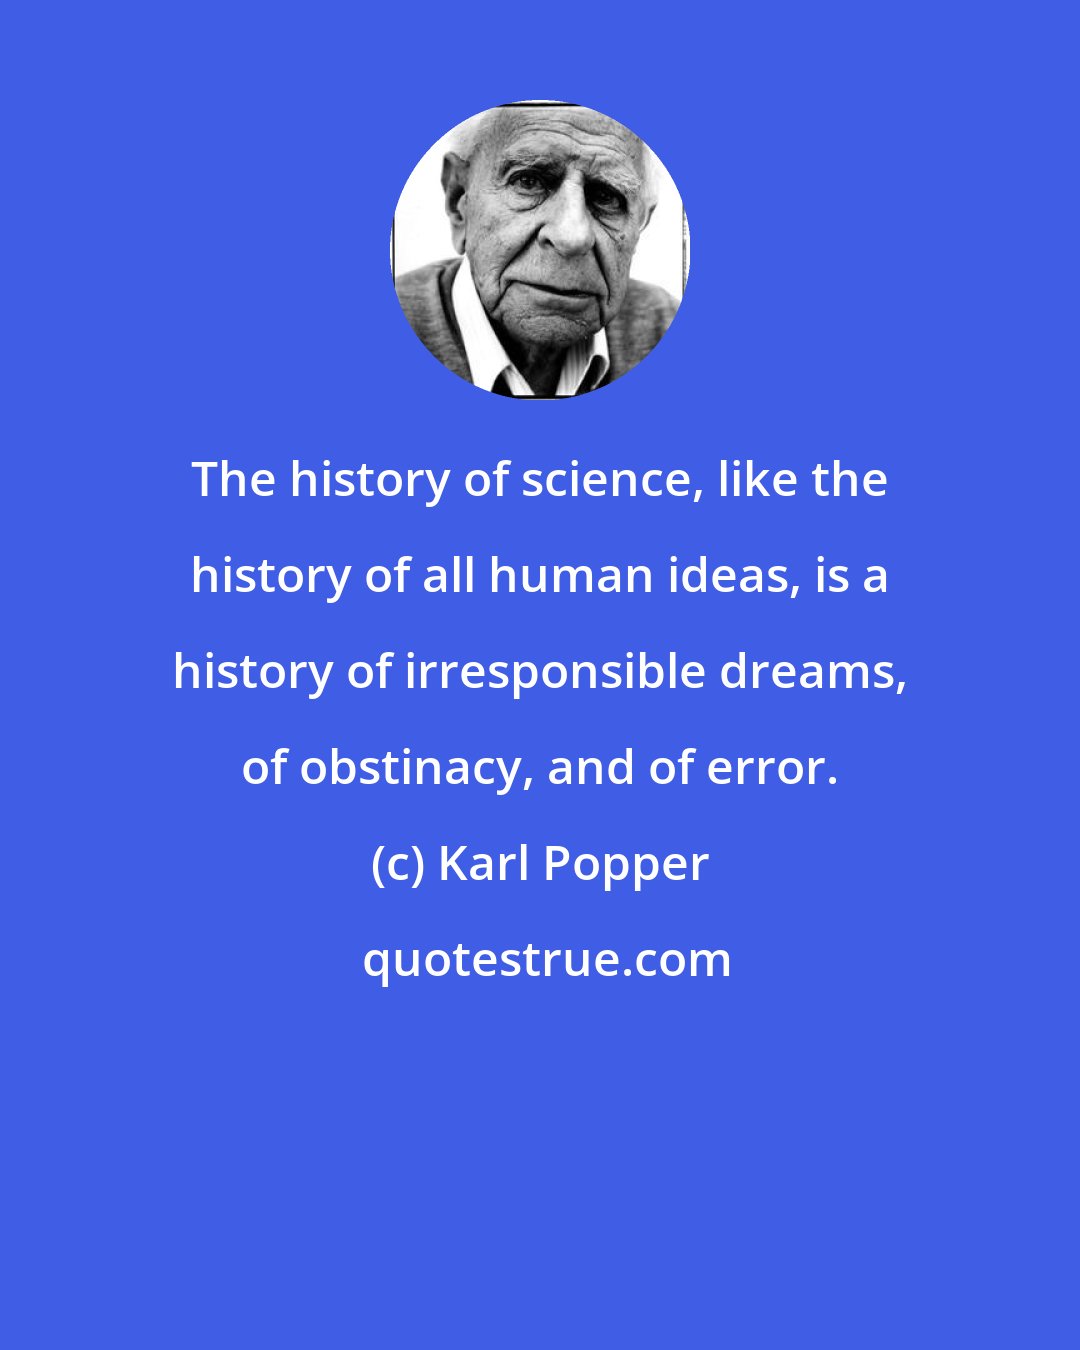 Karl Popper: The history of science, like the history of all human ideas, is a history of irresponsible dreams, of obstinacy, and of error.